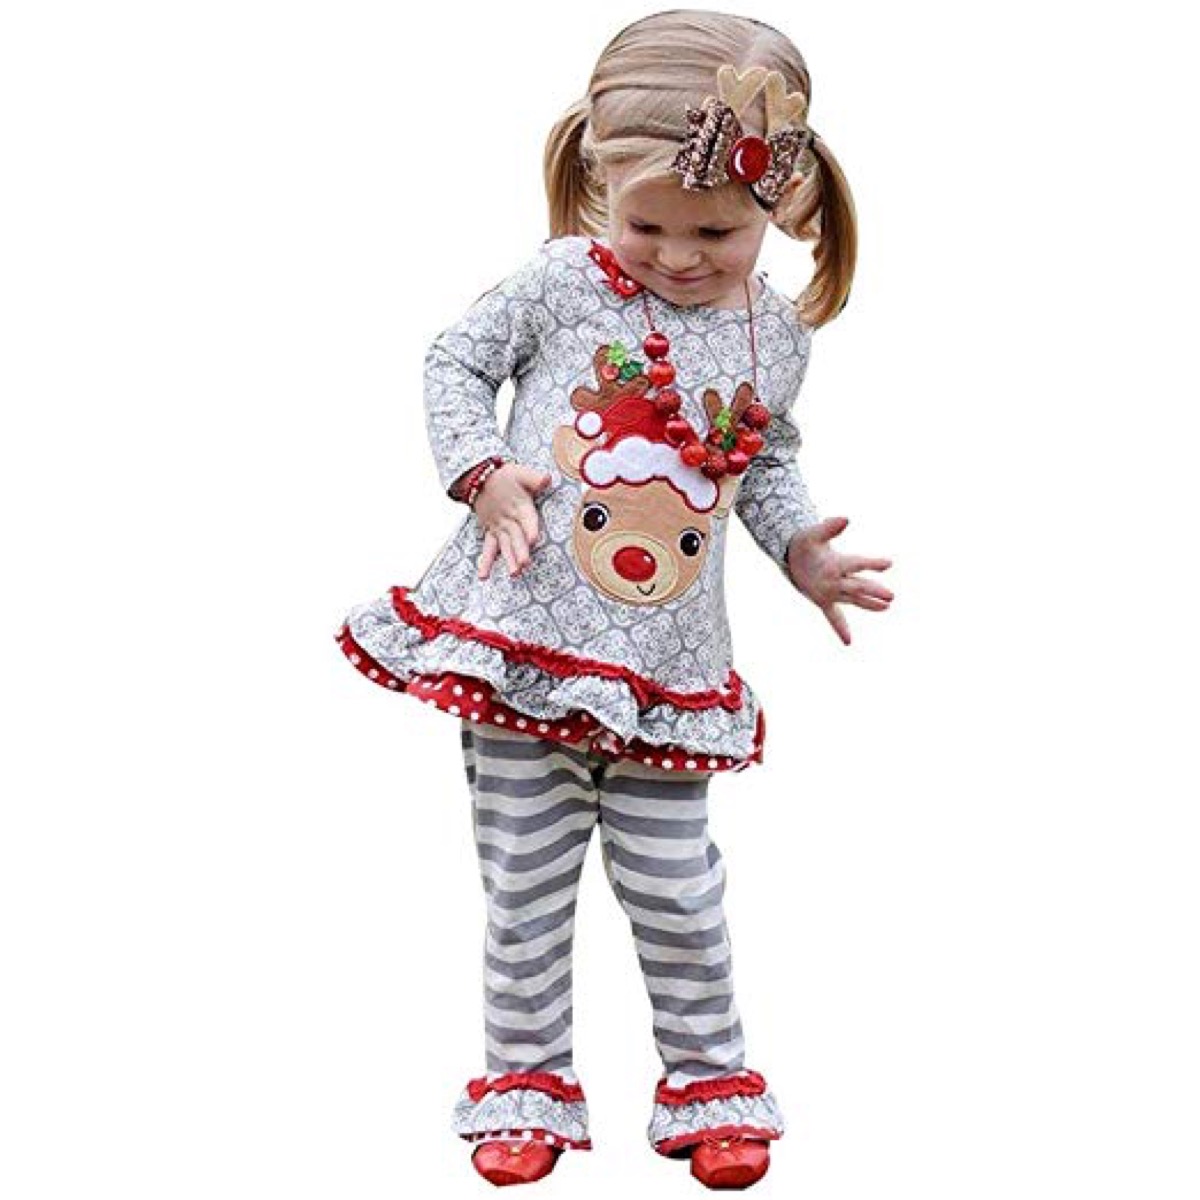 little white girl in gray and white reindeer outfit